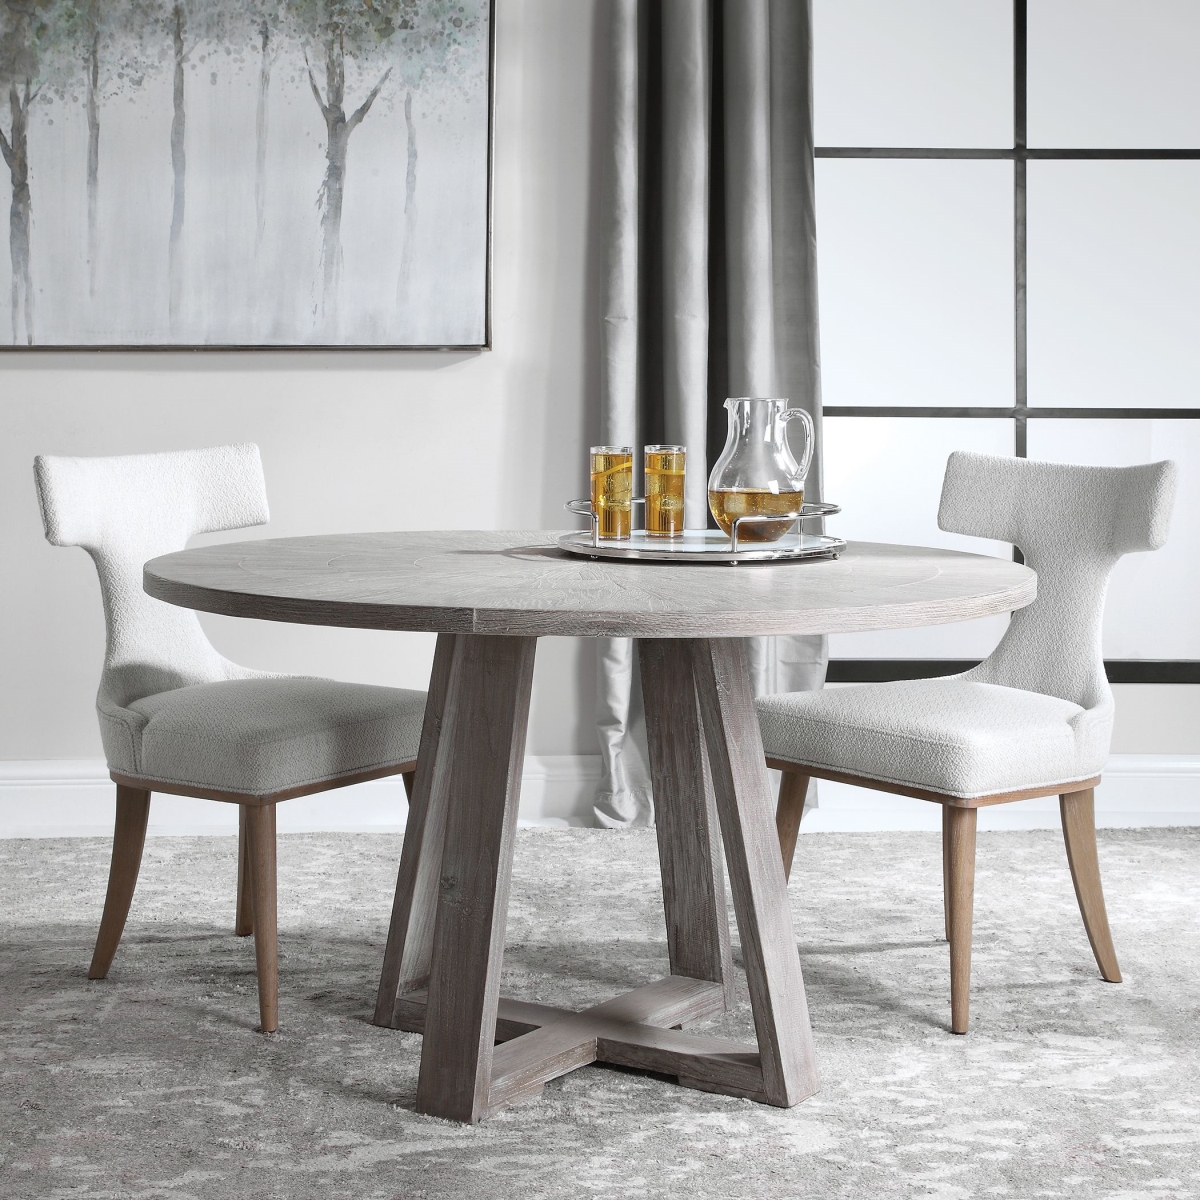 Picture of 212 Main 24952 40 x 75 x 60 in. Gidran Dining Table  Gray